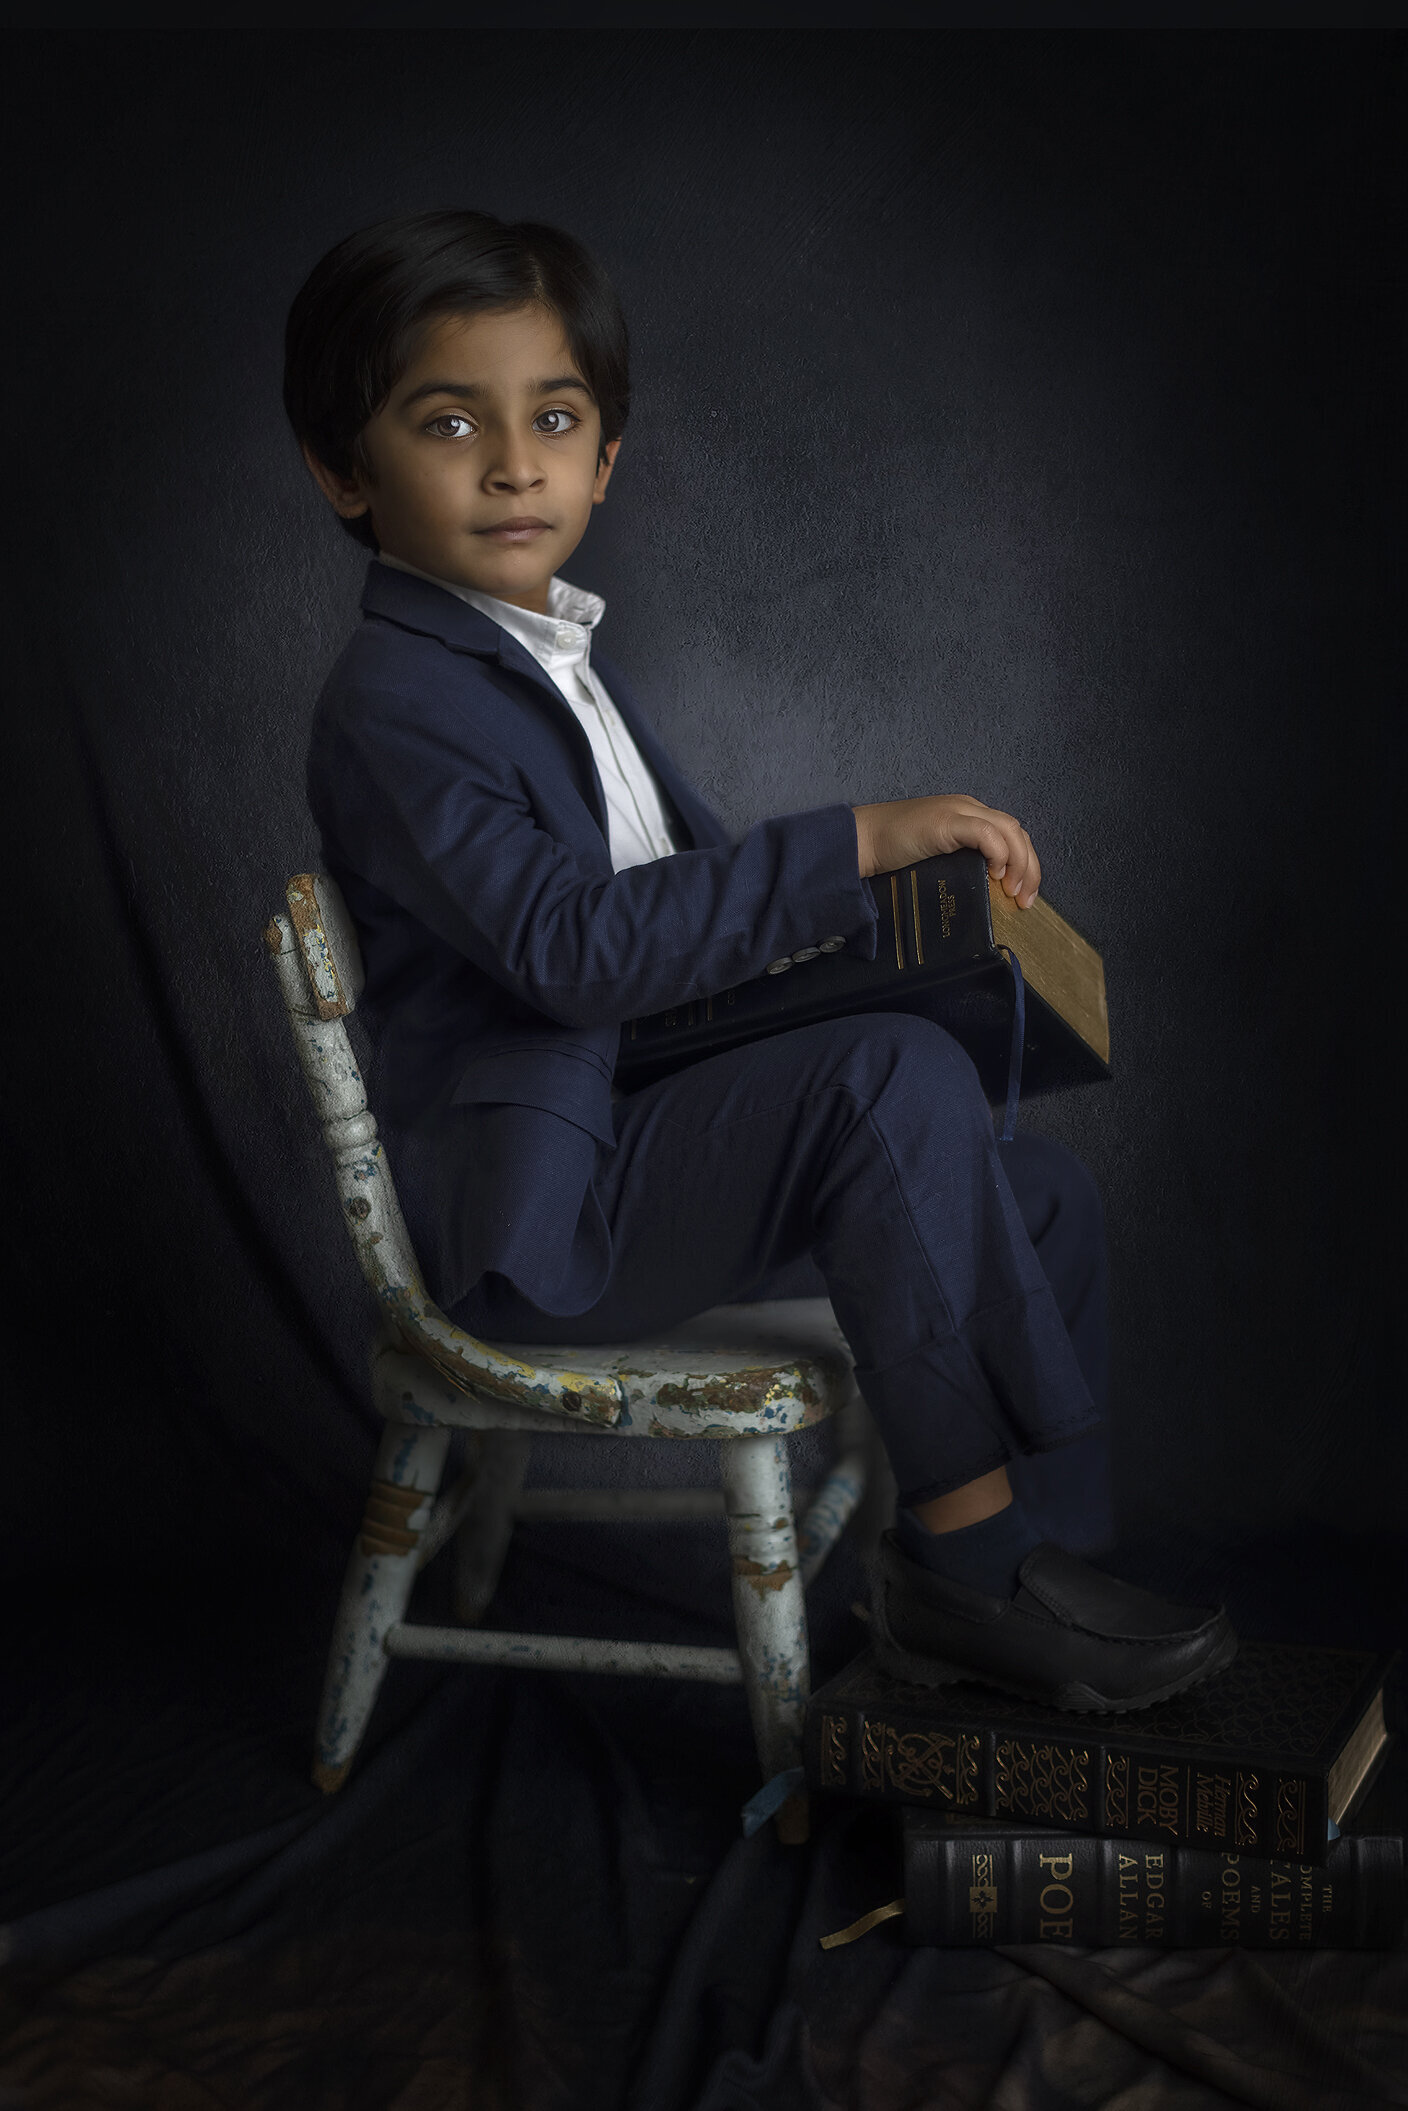 Young boy in Dallas Fine Art photoshoot.